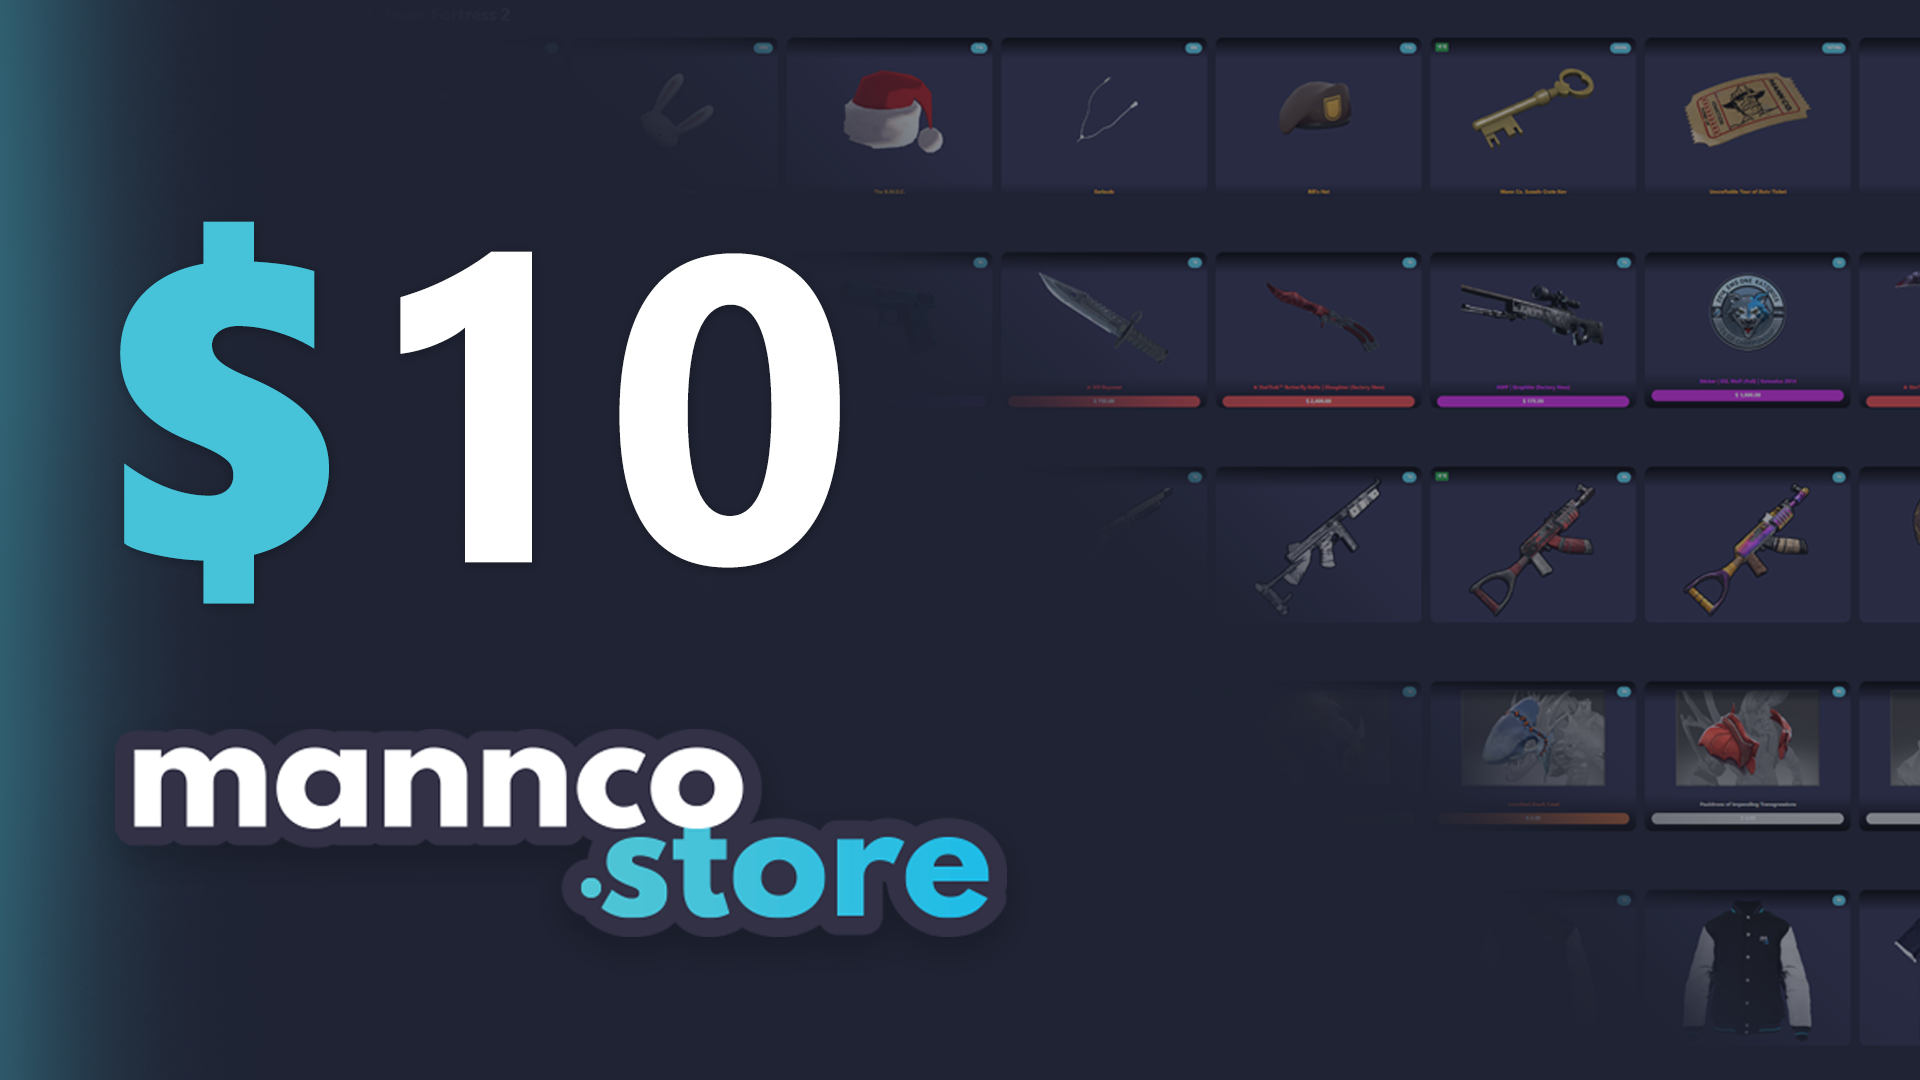 Mannco.store $10 Gift Card